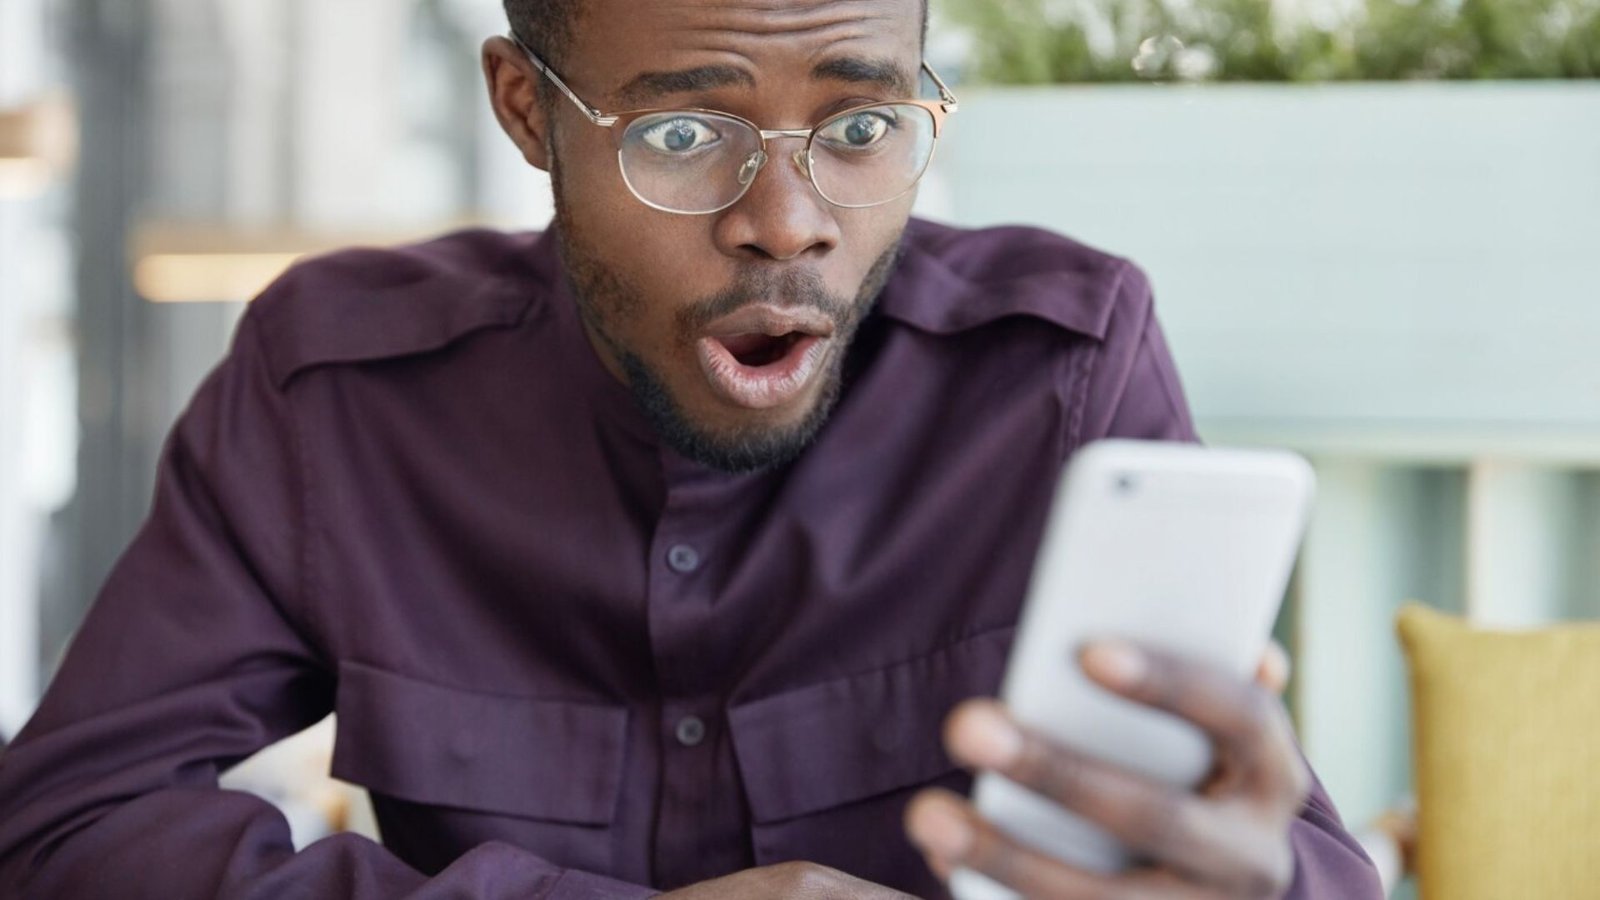 a man holding a smartphone shocked